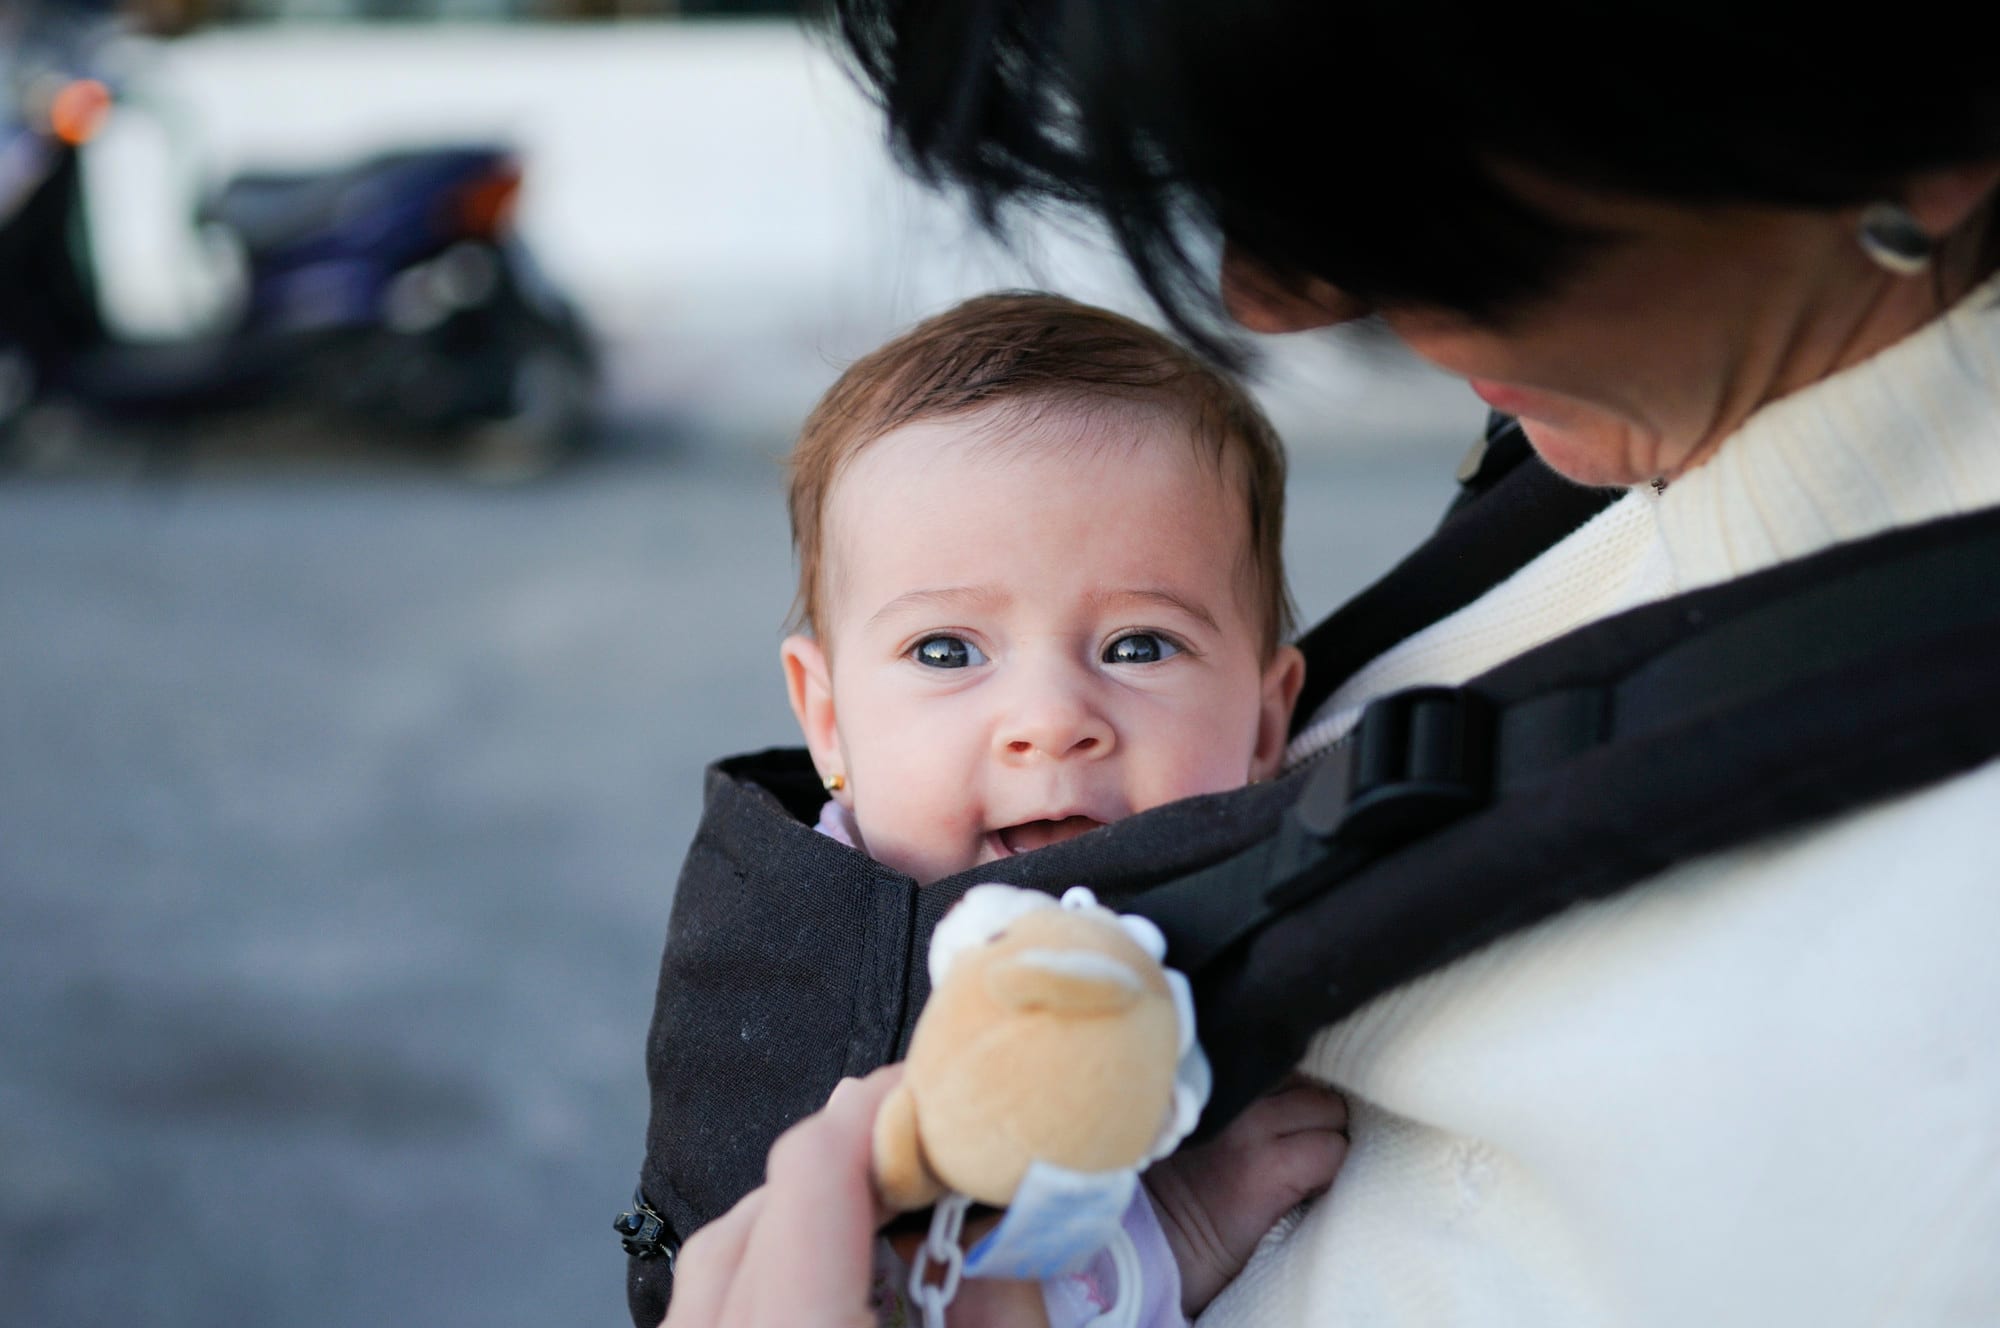 mother-carrying-her-baby-girl-baby-carrier-outdoors.jpg